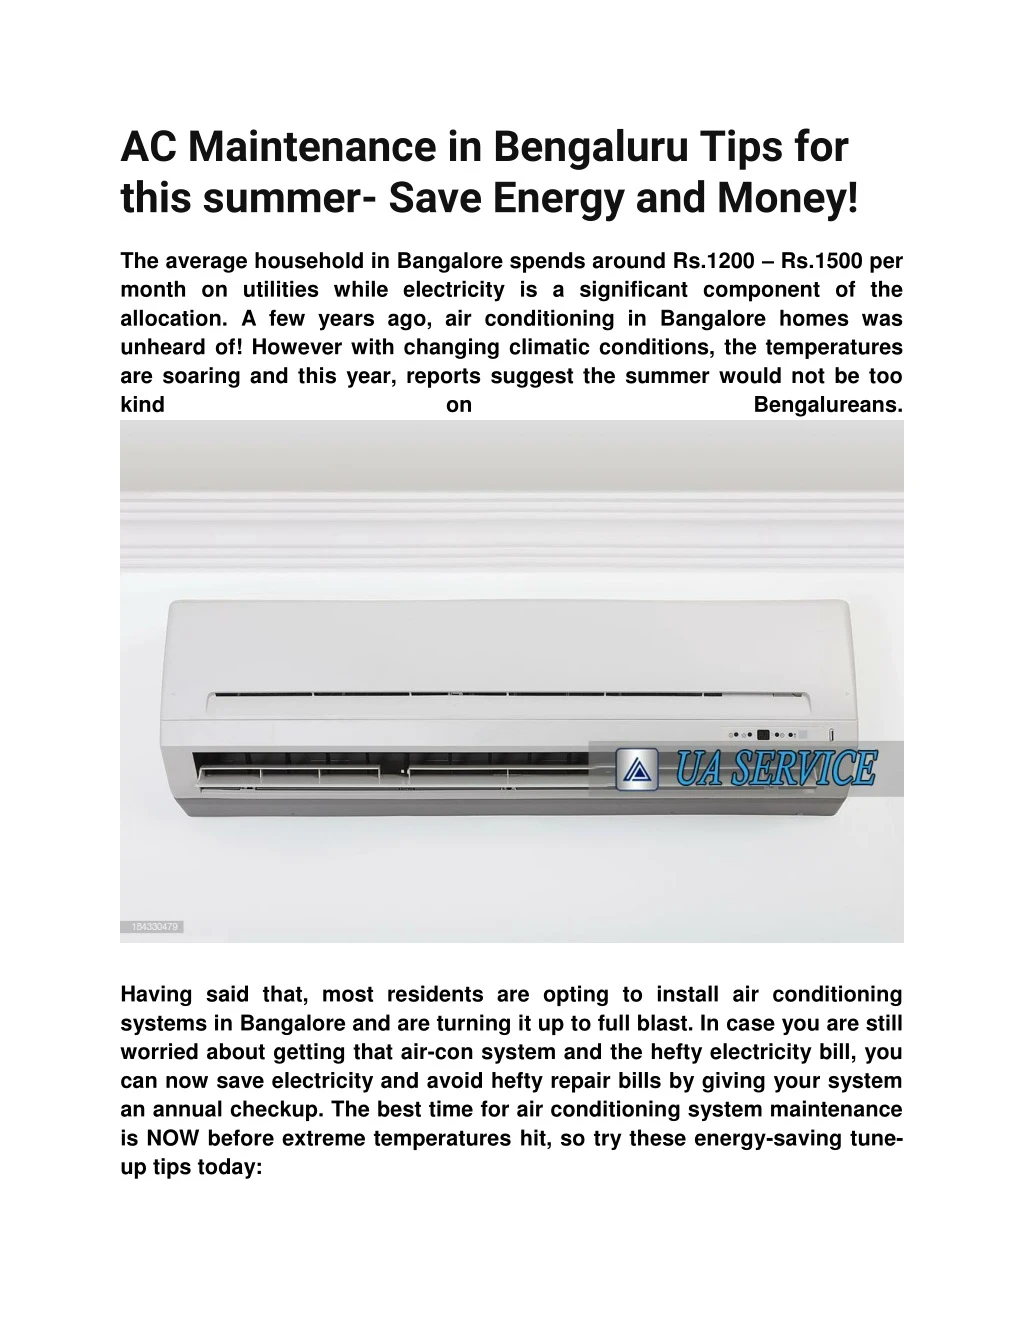 ac maintenance in bengaluru tips for this summer